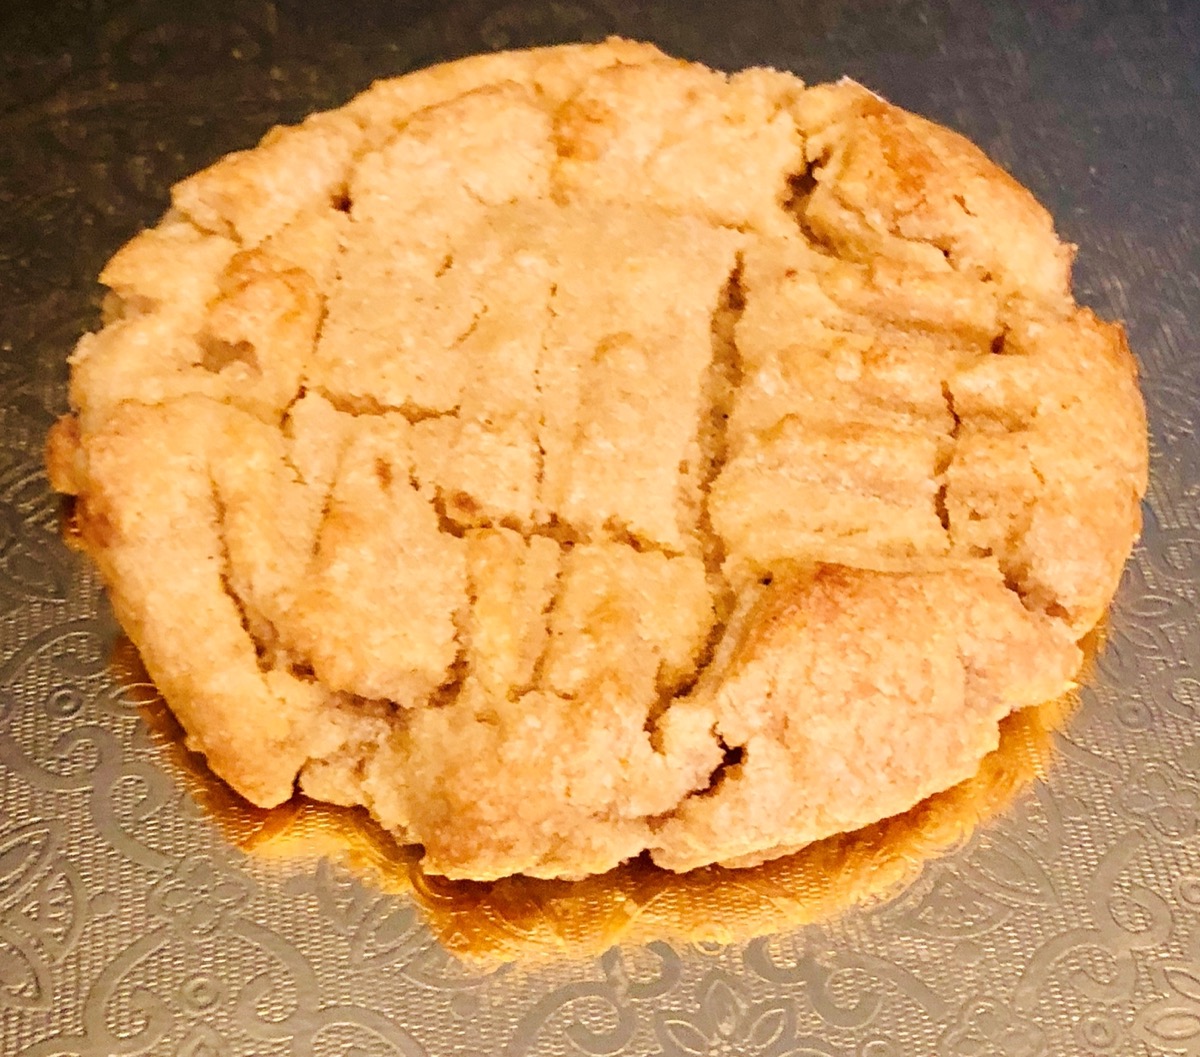 Christine's Cakes & Pastries - Peanut Butter Cookie